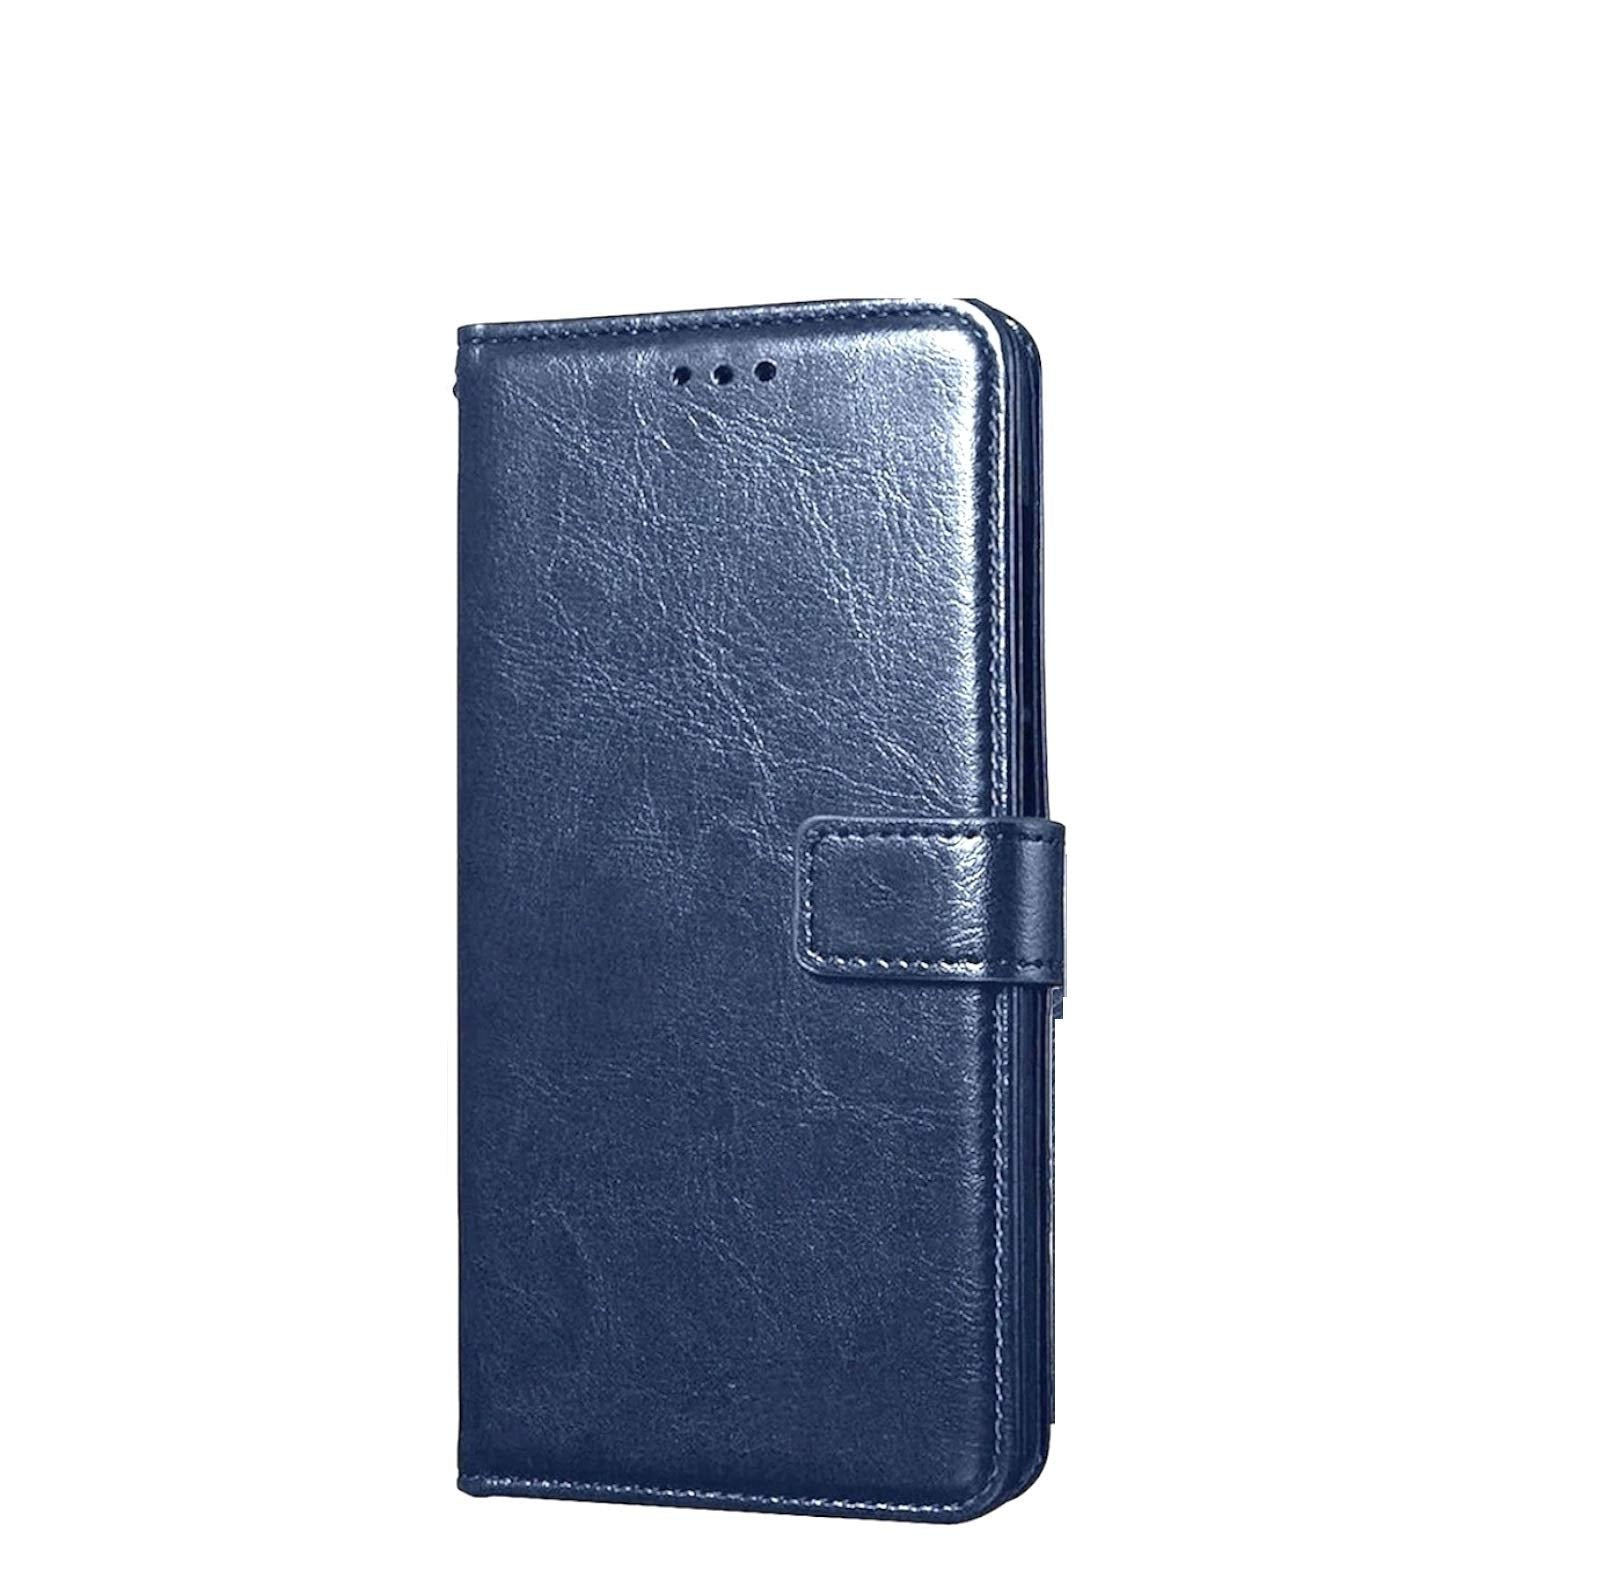 Bracevor Samsung galaxy M30 Flip Cover Case | Premium Leather | Inner TPU | Foldable Stand | Wallet Card Slots - Executive Blue